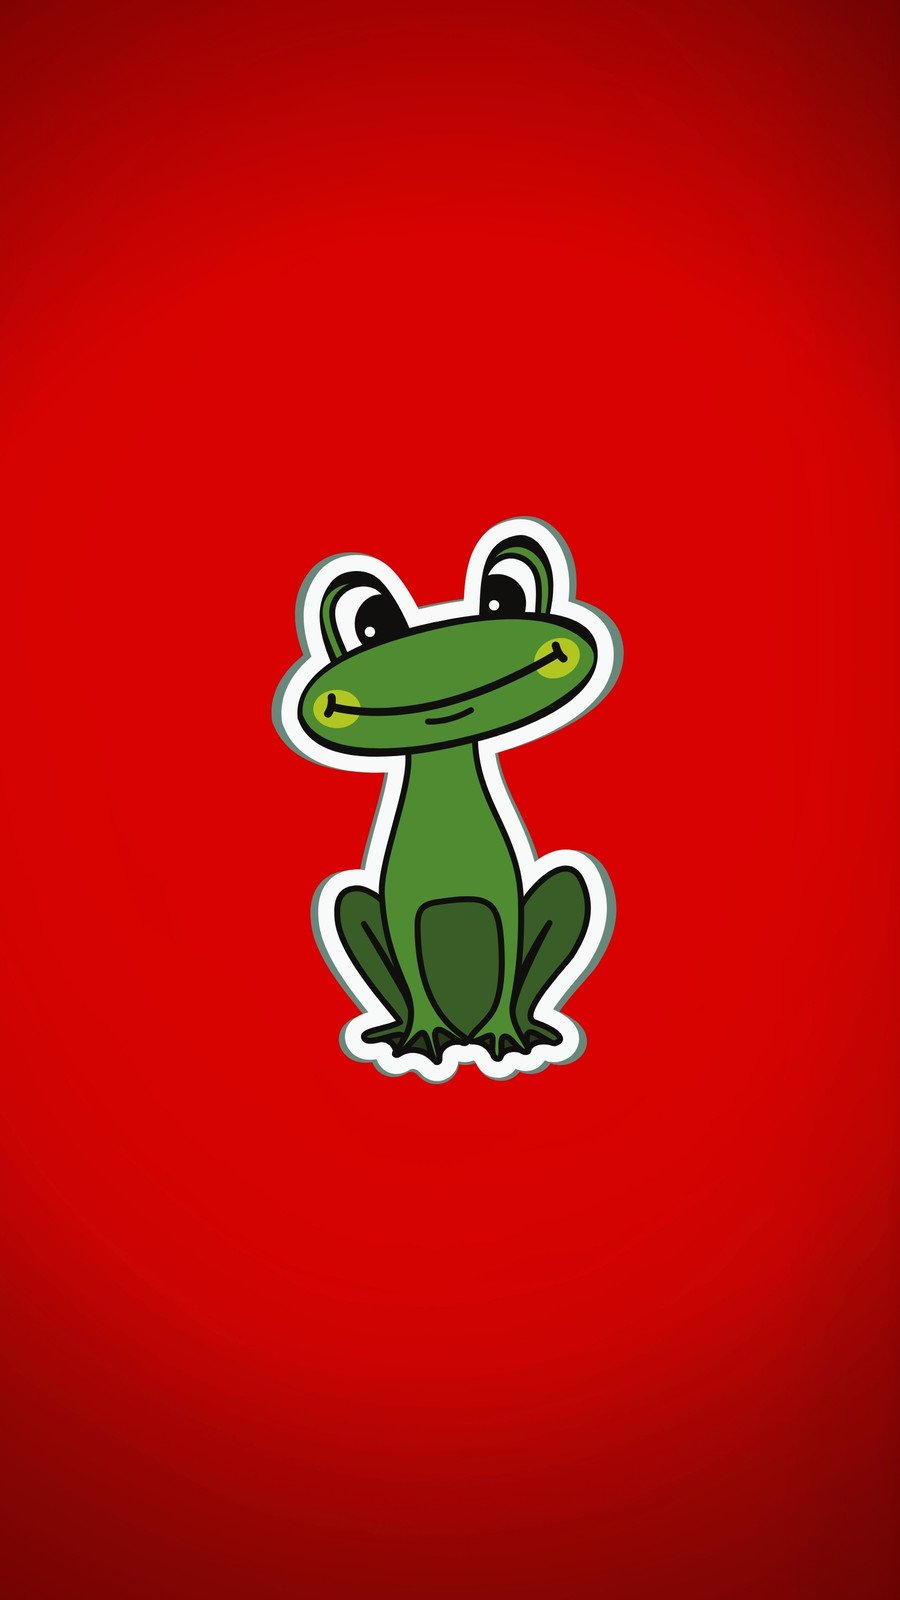 Free and customizable frog wallpaper templates